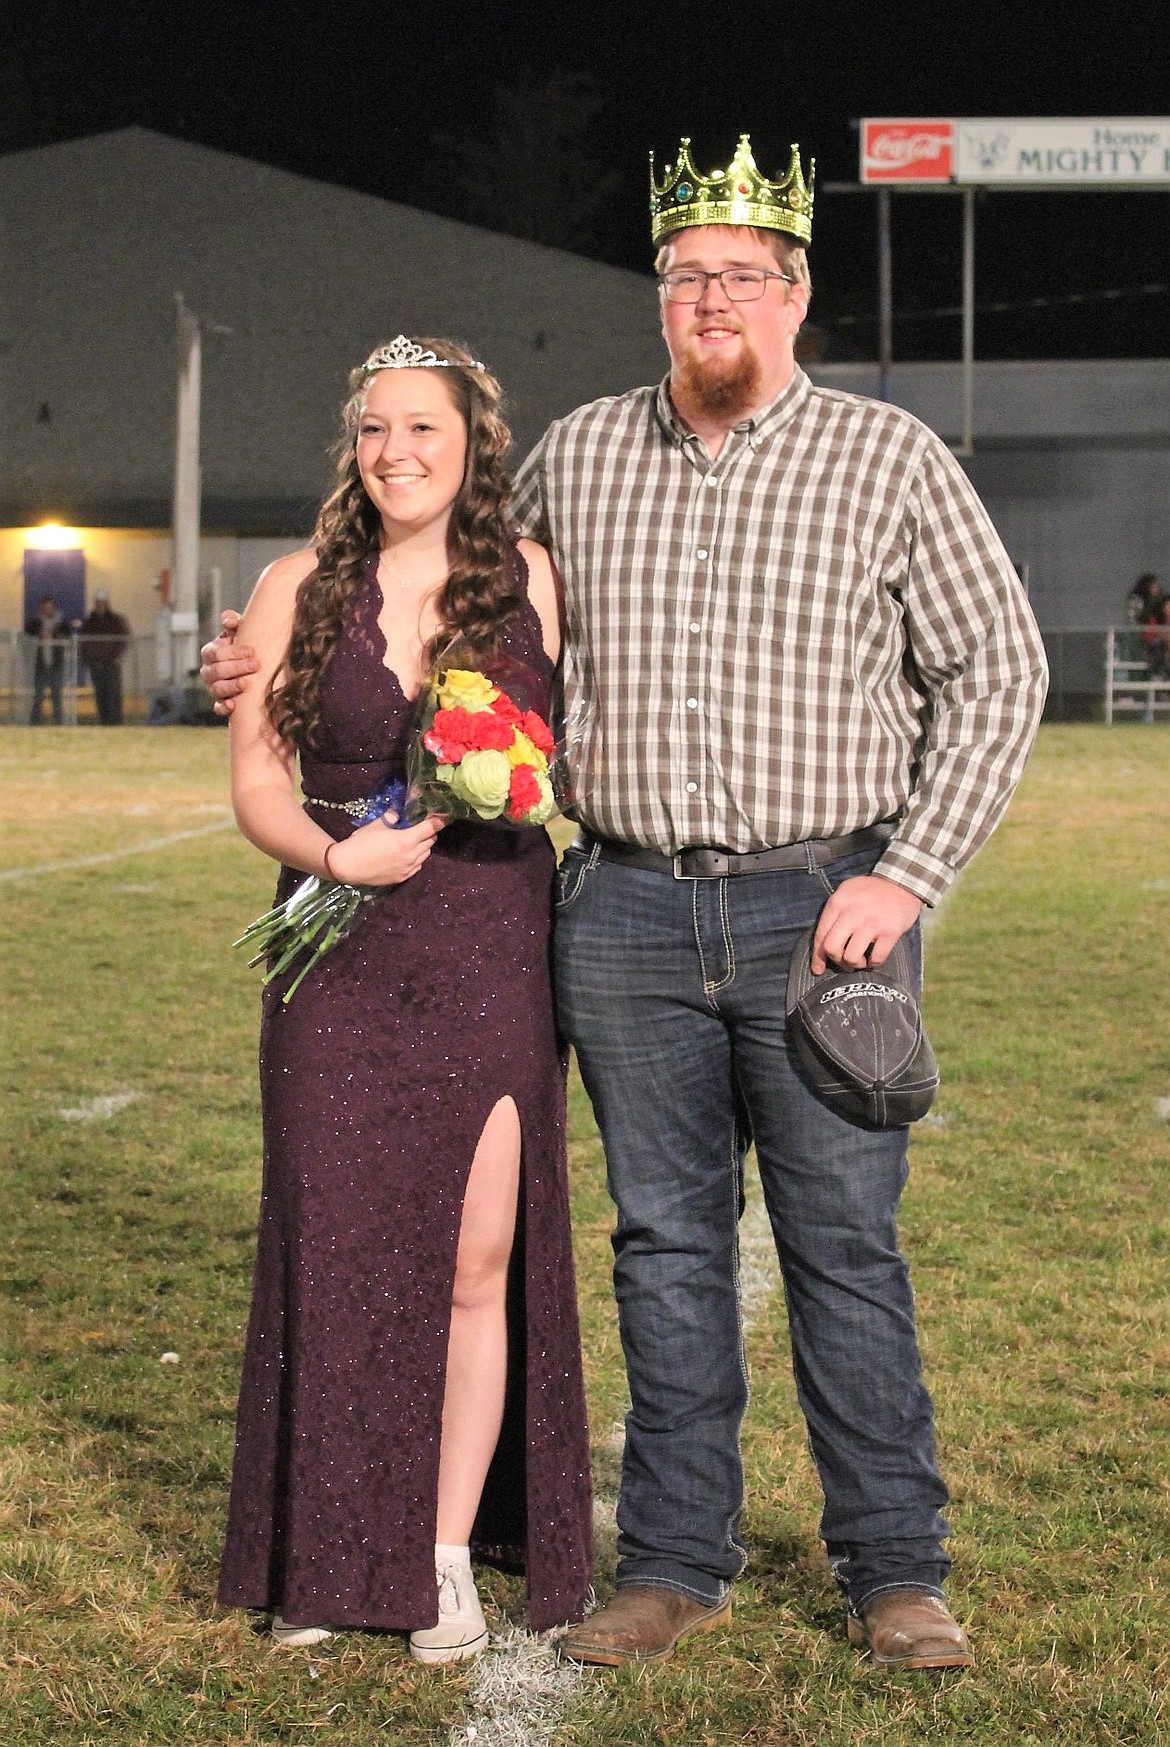 Seniors Hannah Calloway and Kade Parkin were announced as the 2018 Homecoming queen and king during the Friday, Oct. 19 football game.